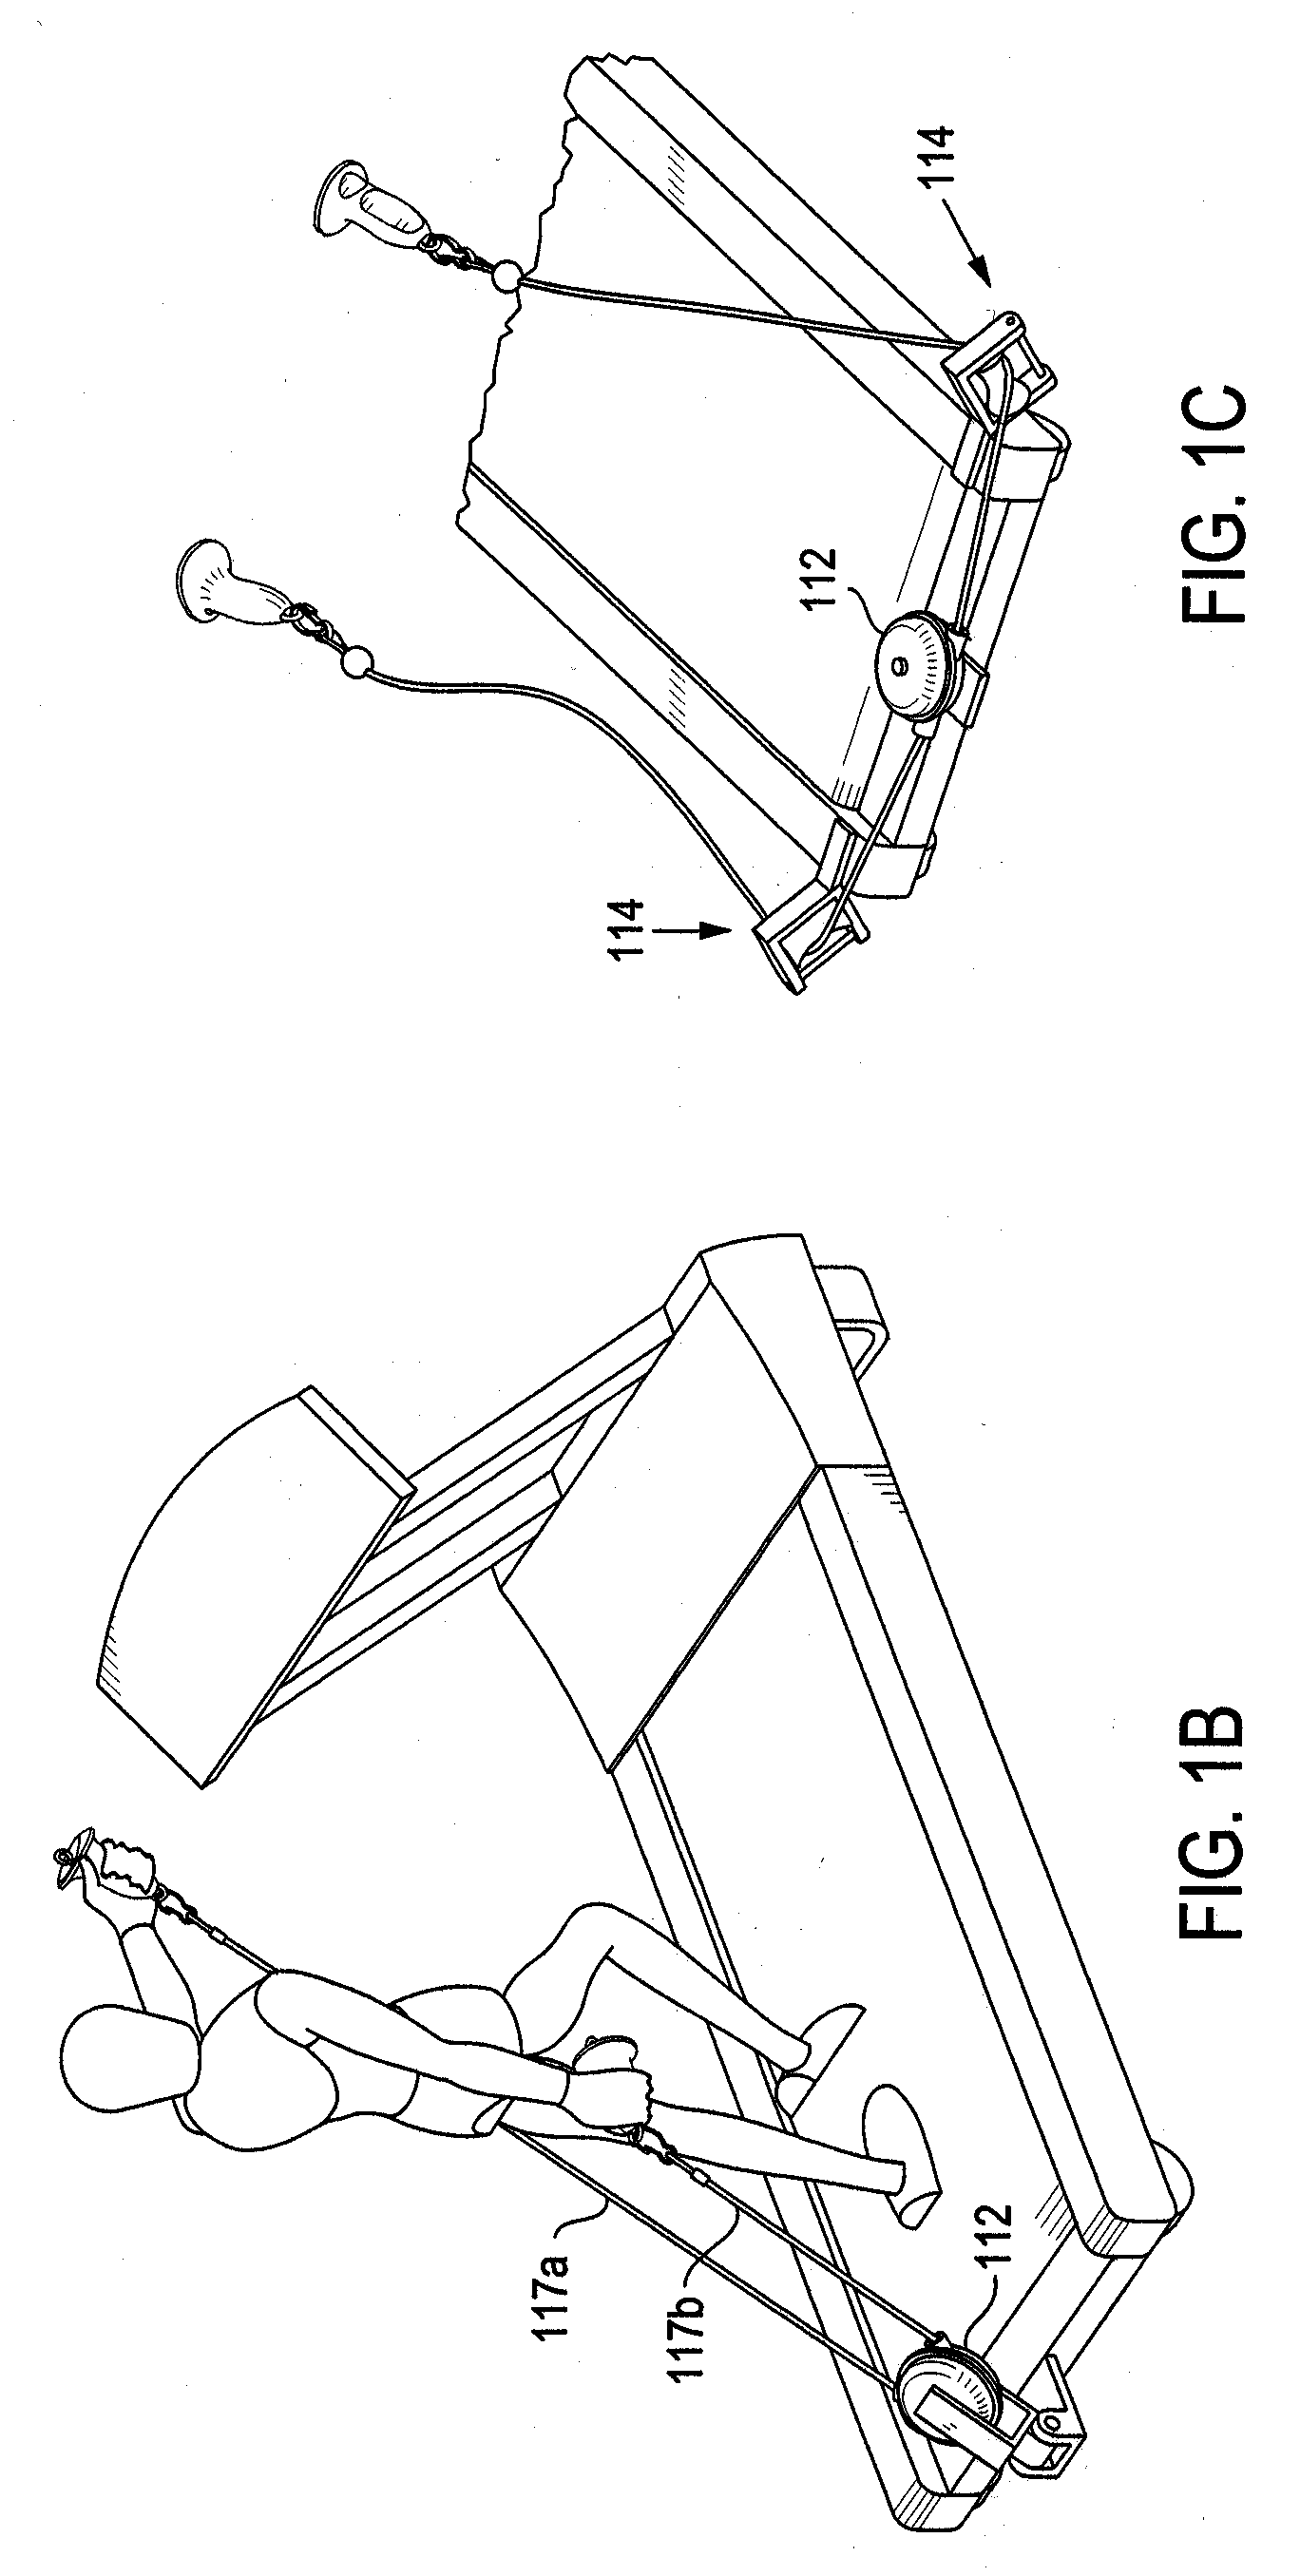 Exercise device for exercising upper body simultaneously with lower body exercise